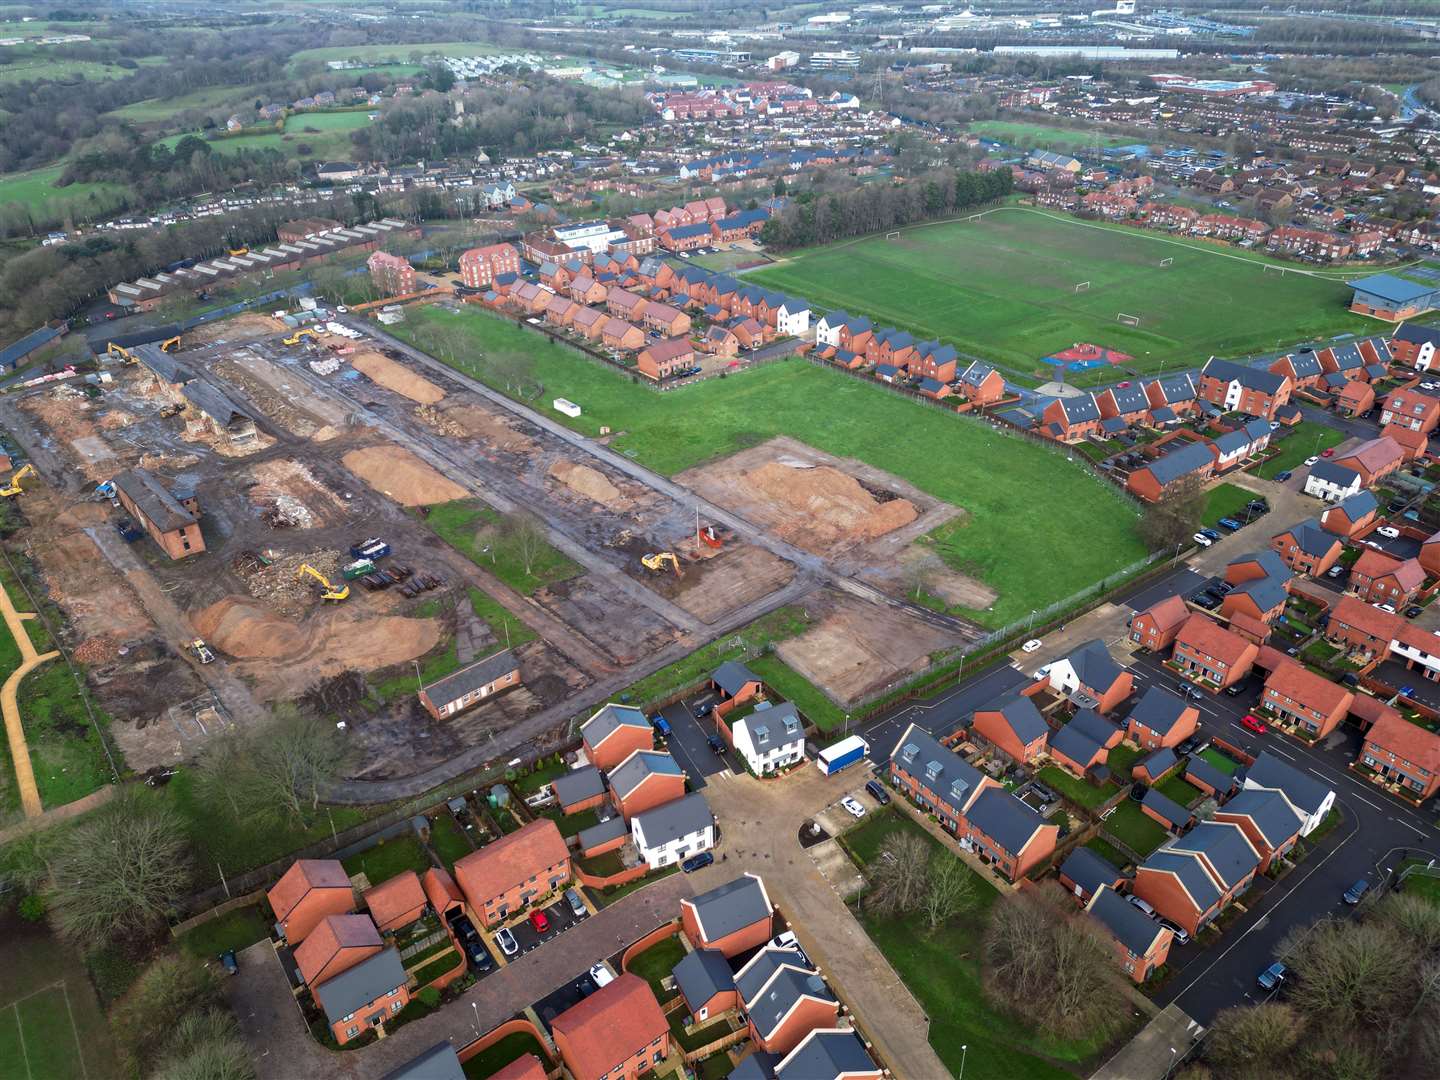 New homes at The Stadium can be seen in the foreground and alongside the football pitches. The Officers' Mess homes can be seen at the top of the picture. The demolition of Risborough Barracks can be seen on the left. Picture: Barry Goodwin